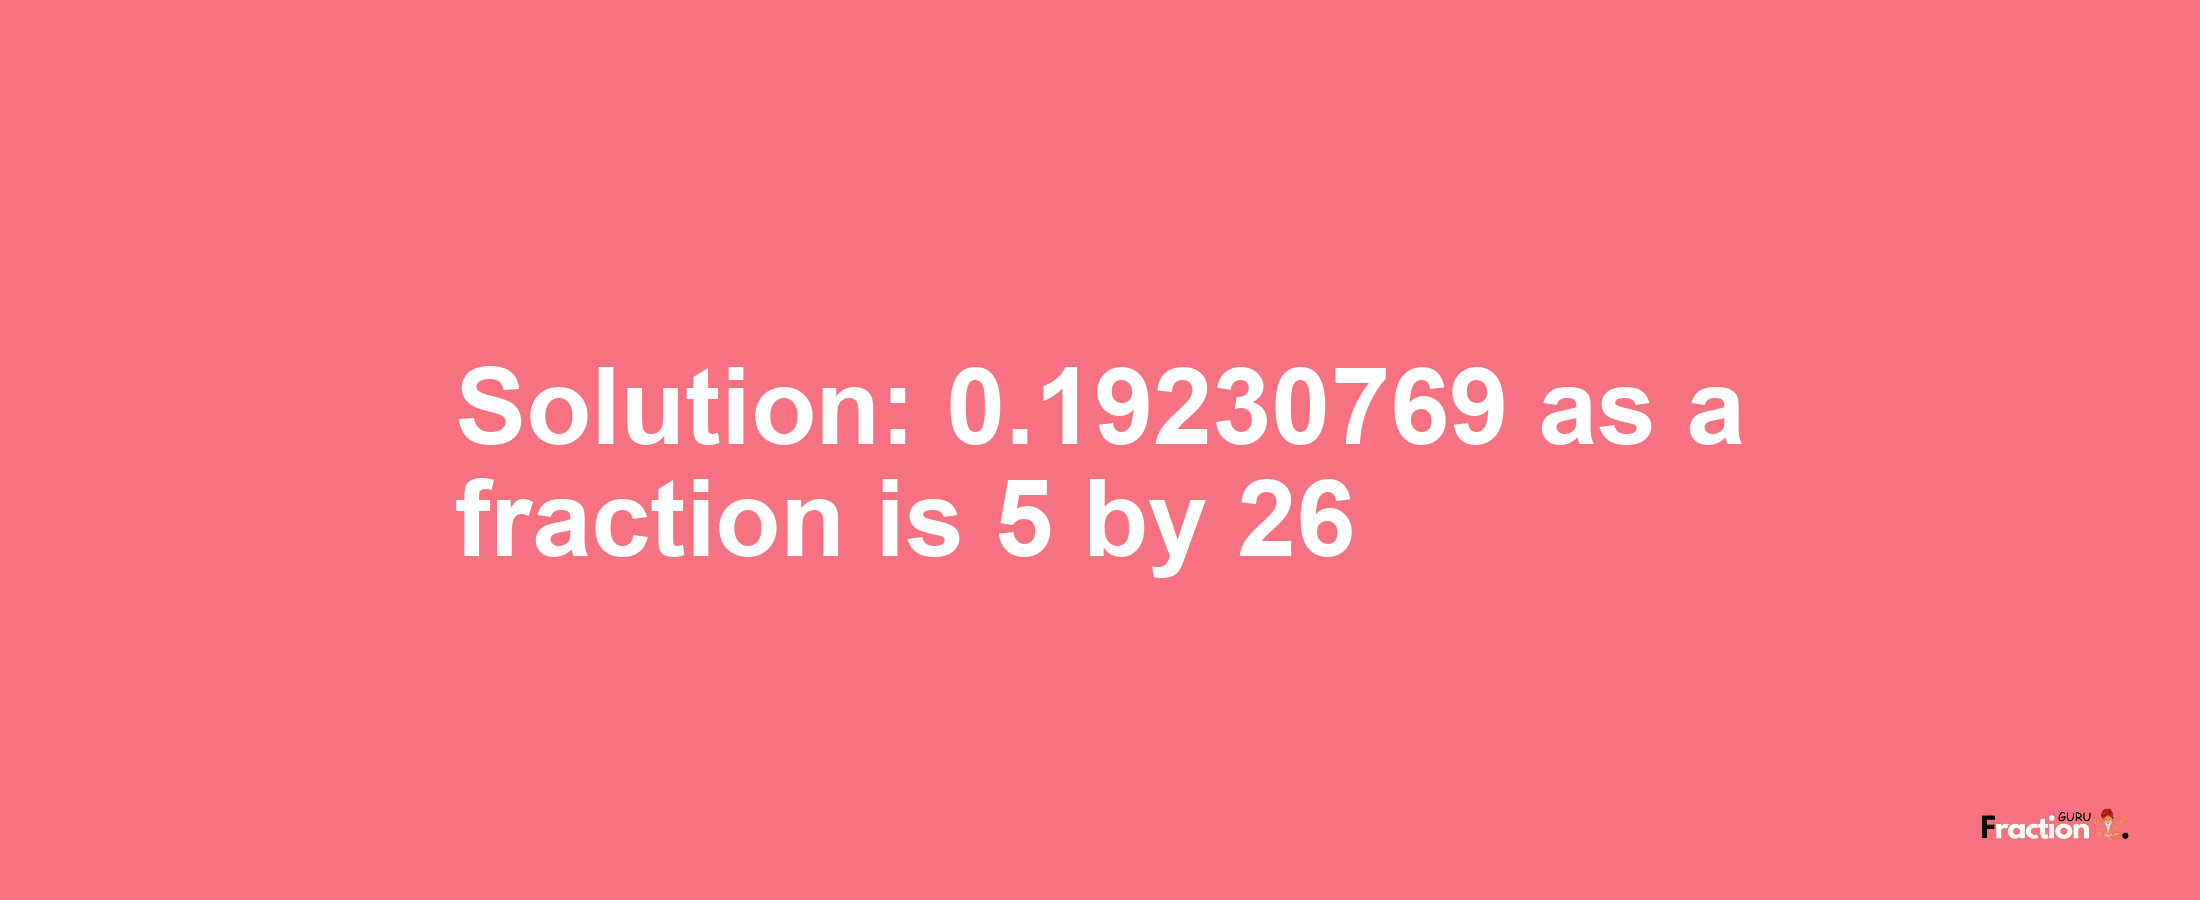 Solution:0.19230769 as a fraction is 5/26